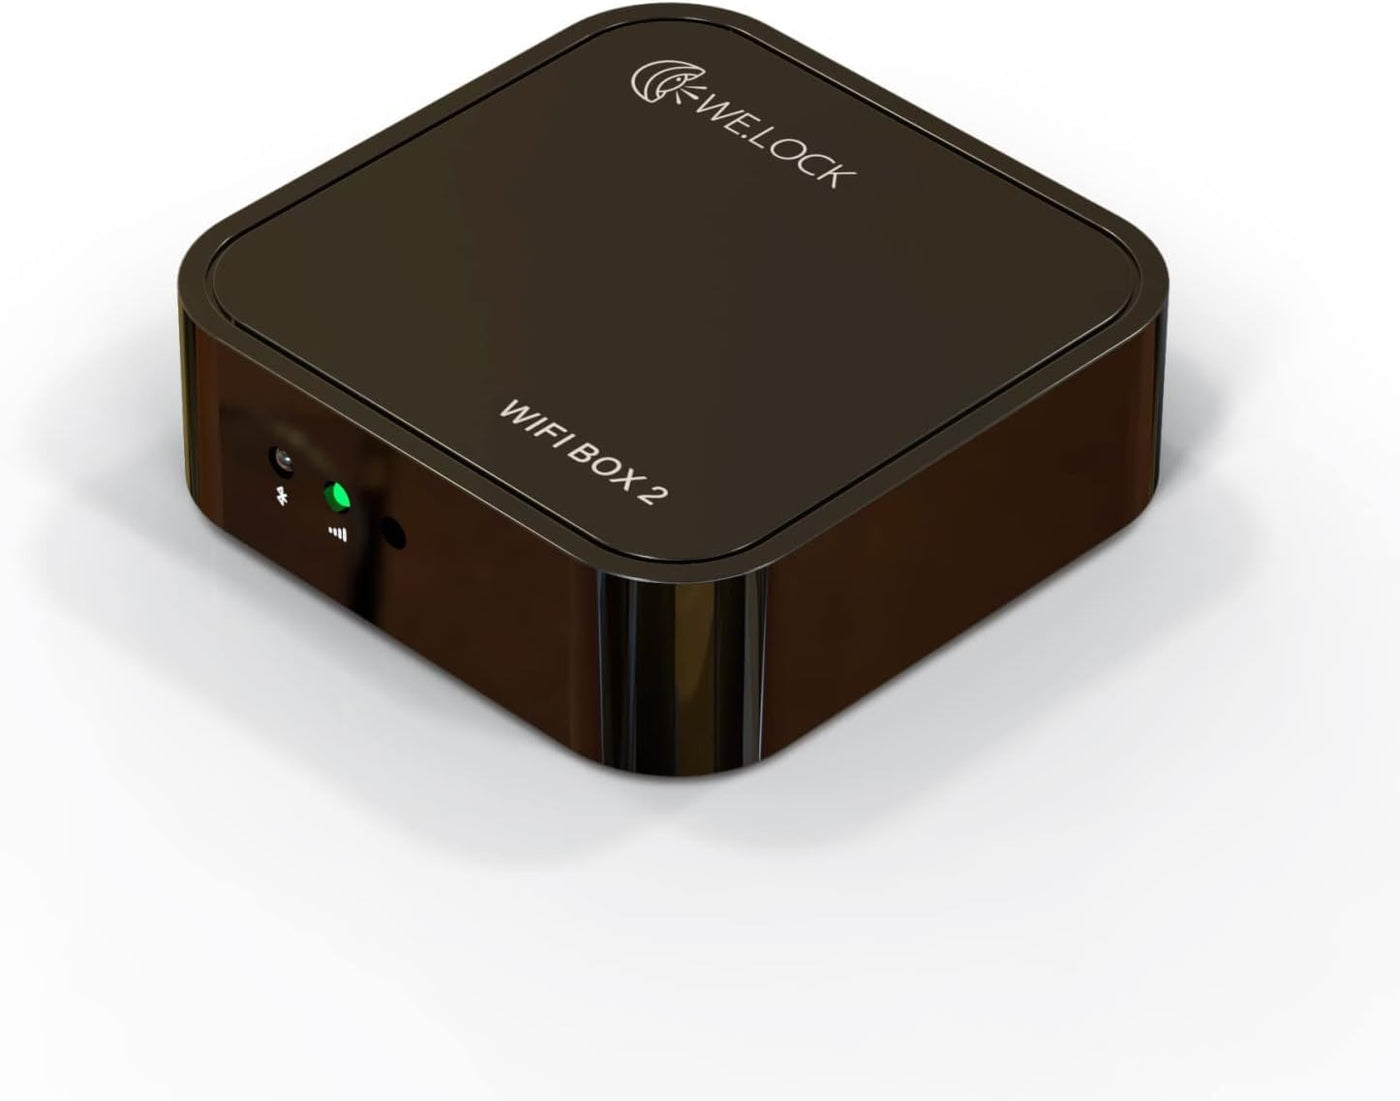 Welock wifibox3 for Home Remote Unlocking and Connection with Alexa Wifi Gateway